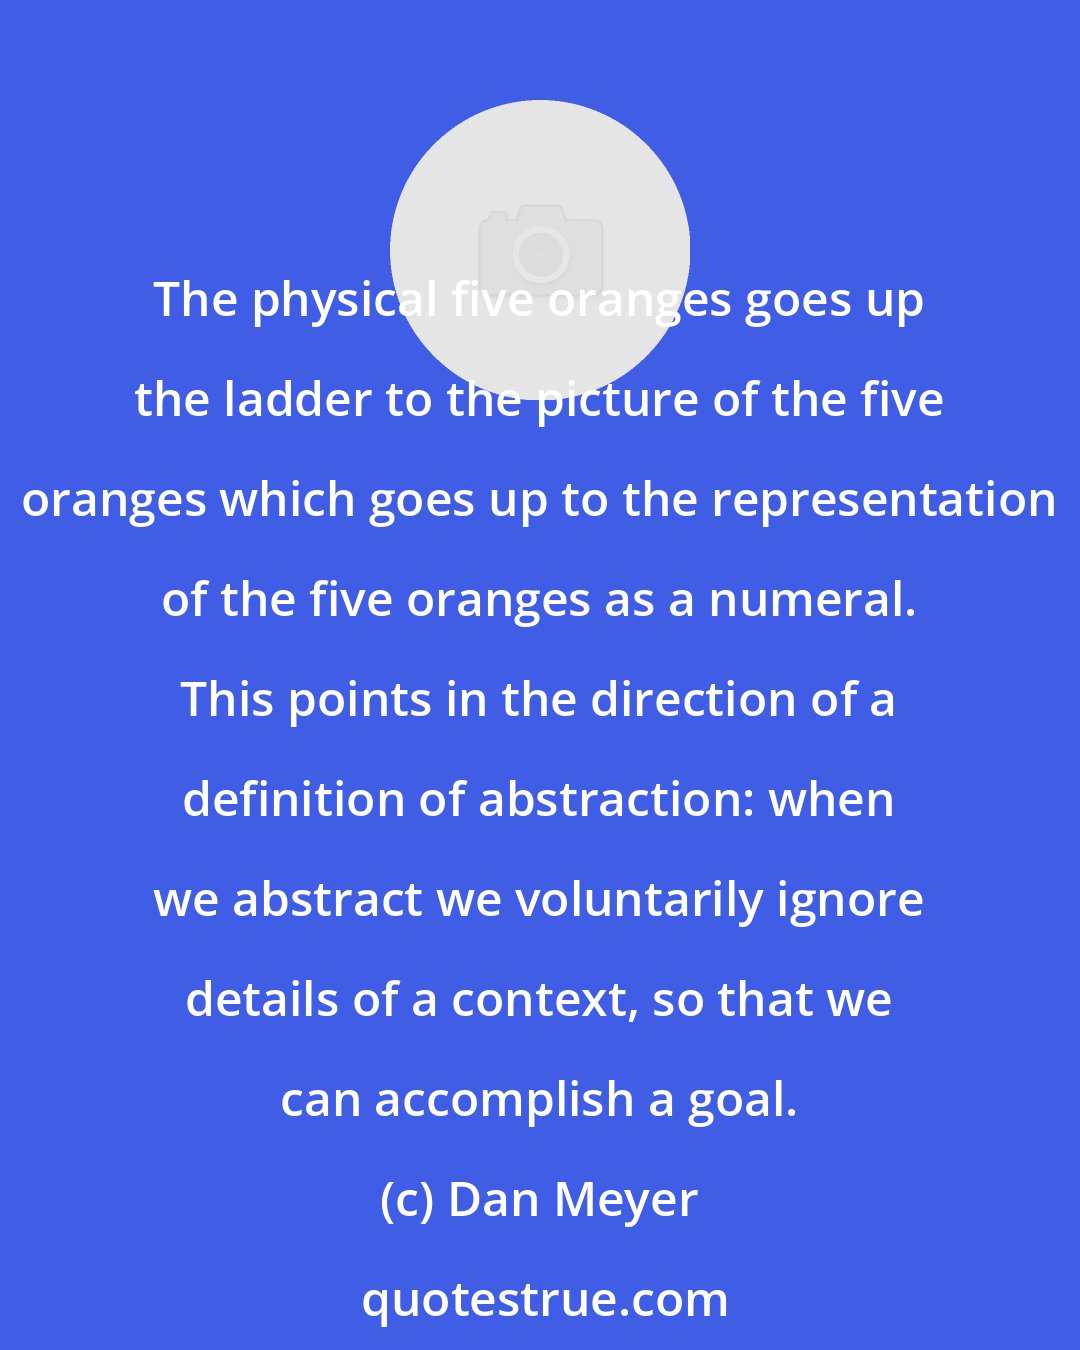 Dan Meyer: The physical five oranges goes up the ladder to the picture of the five oranges which goes up to the representation of the five oranges as a numeral. This points in the direction of a definition of abstraction: when we abstract we voluntarily ignore details of a context, so that we can accomplish a goal.